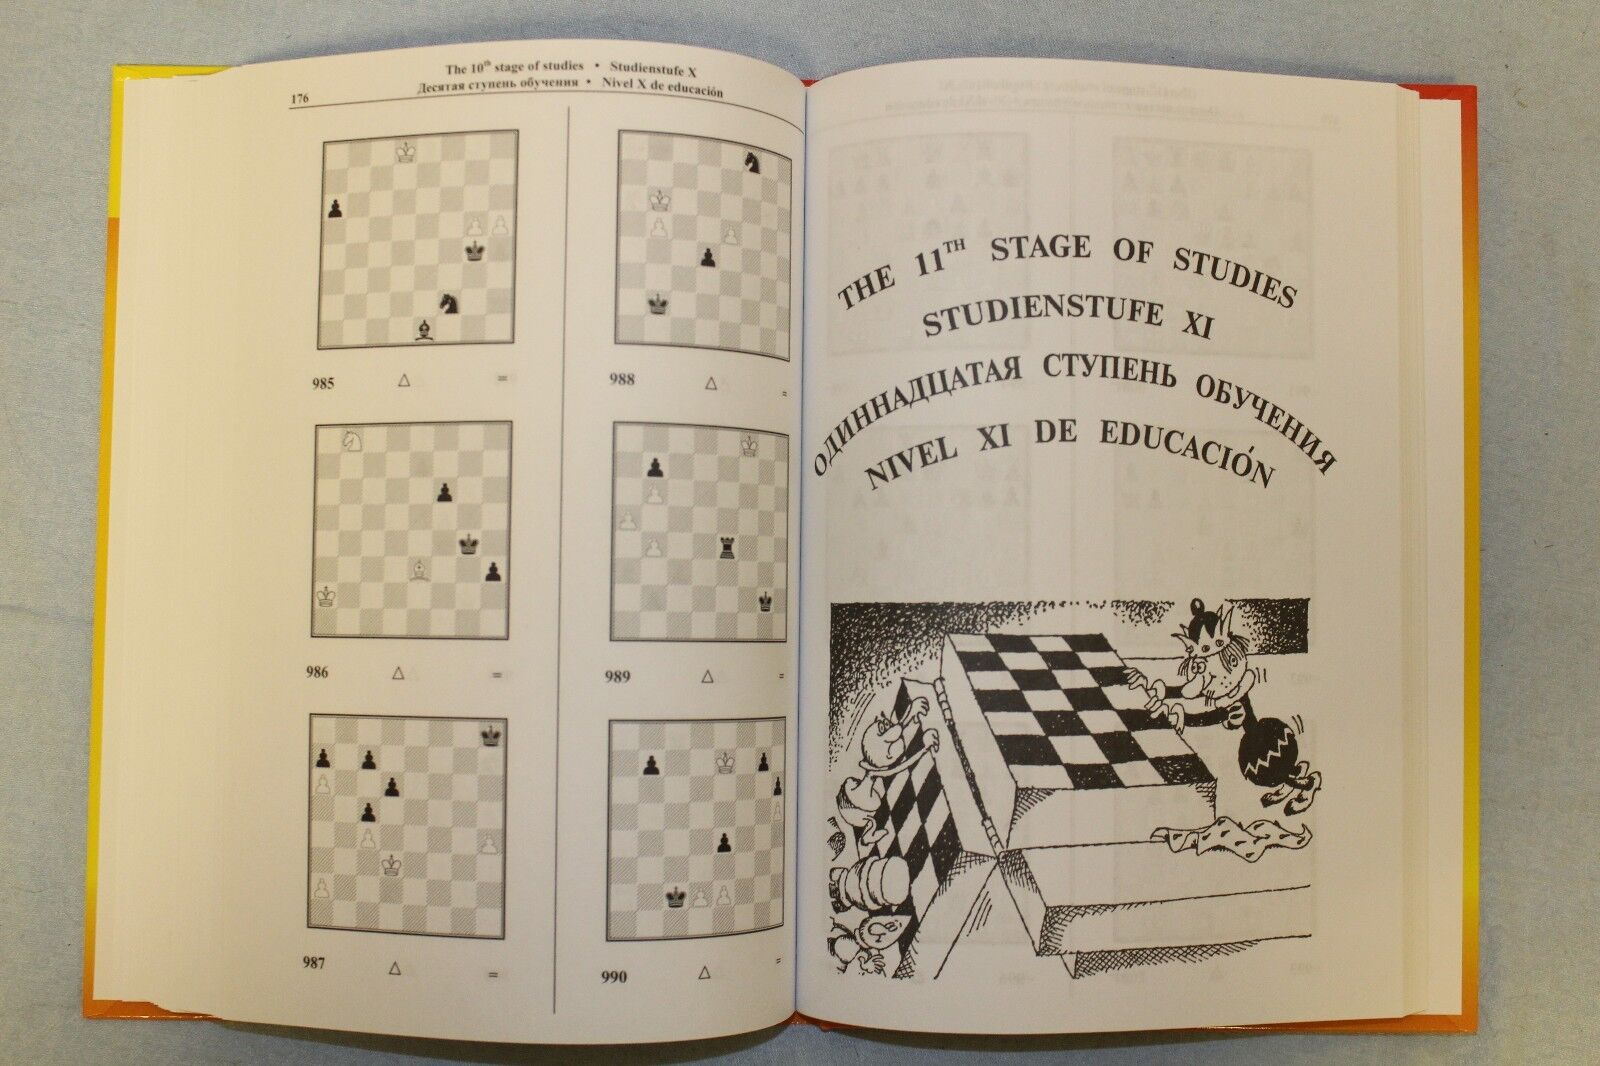 11108.Chess Book: S.Ivashchenko. Manual of Chess Combinations. Vol. II. 2016